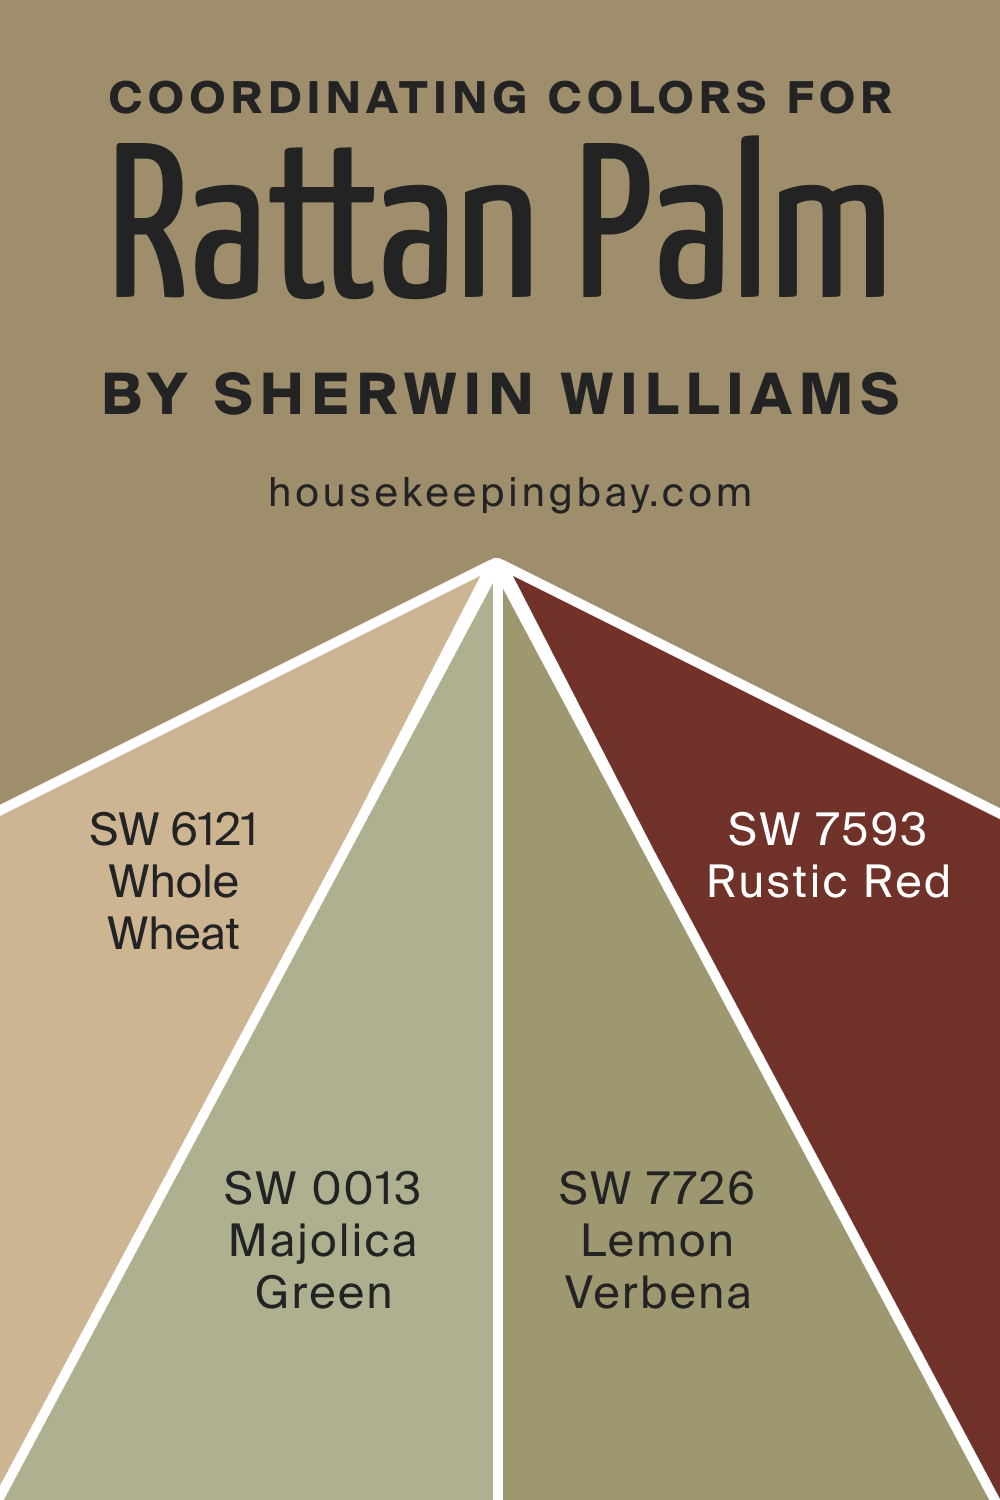 Coordinating Colors for SW 9533 Rattan Palm by Sherwin Williams